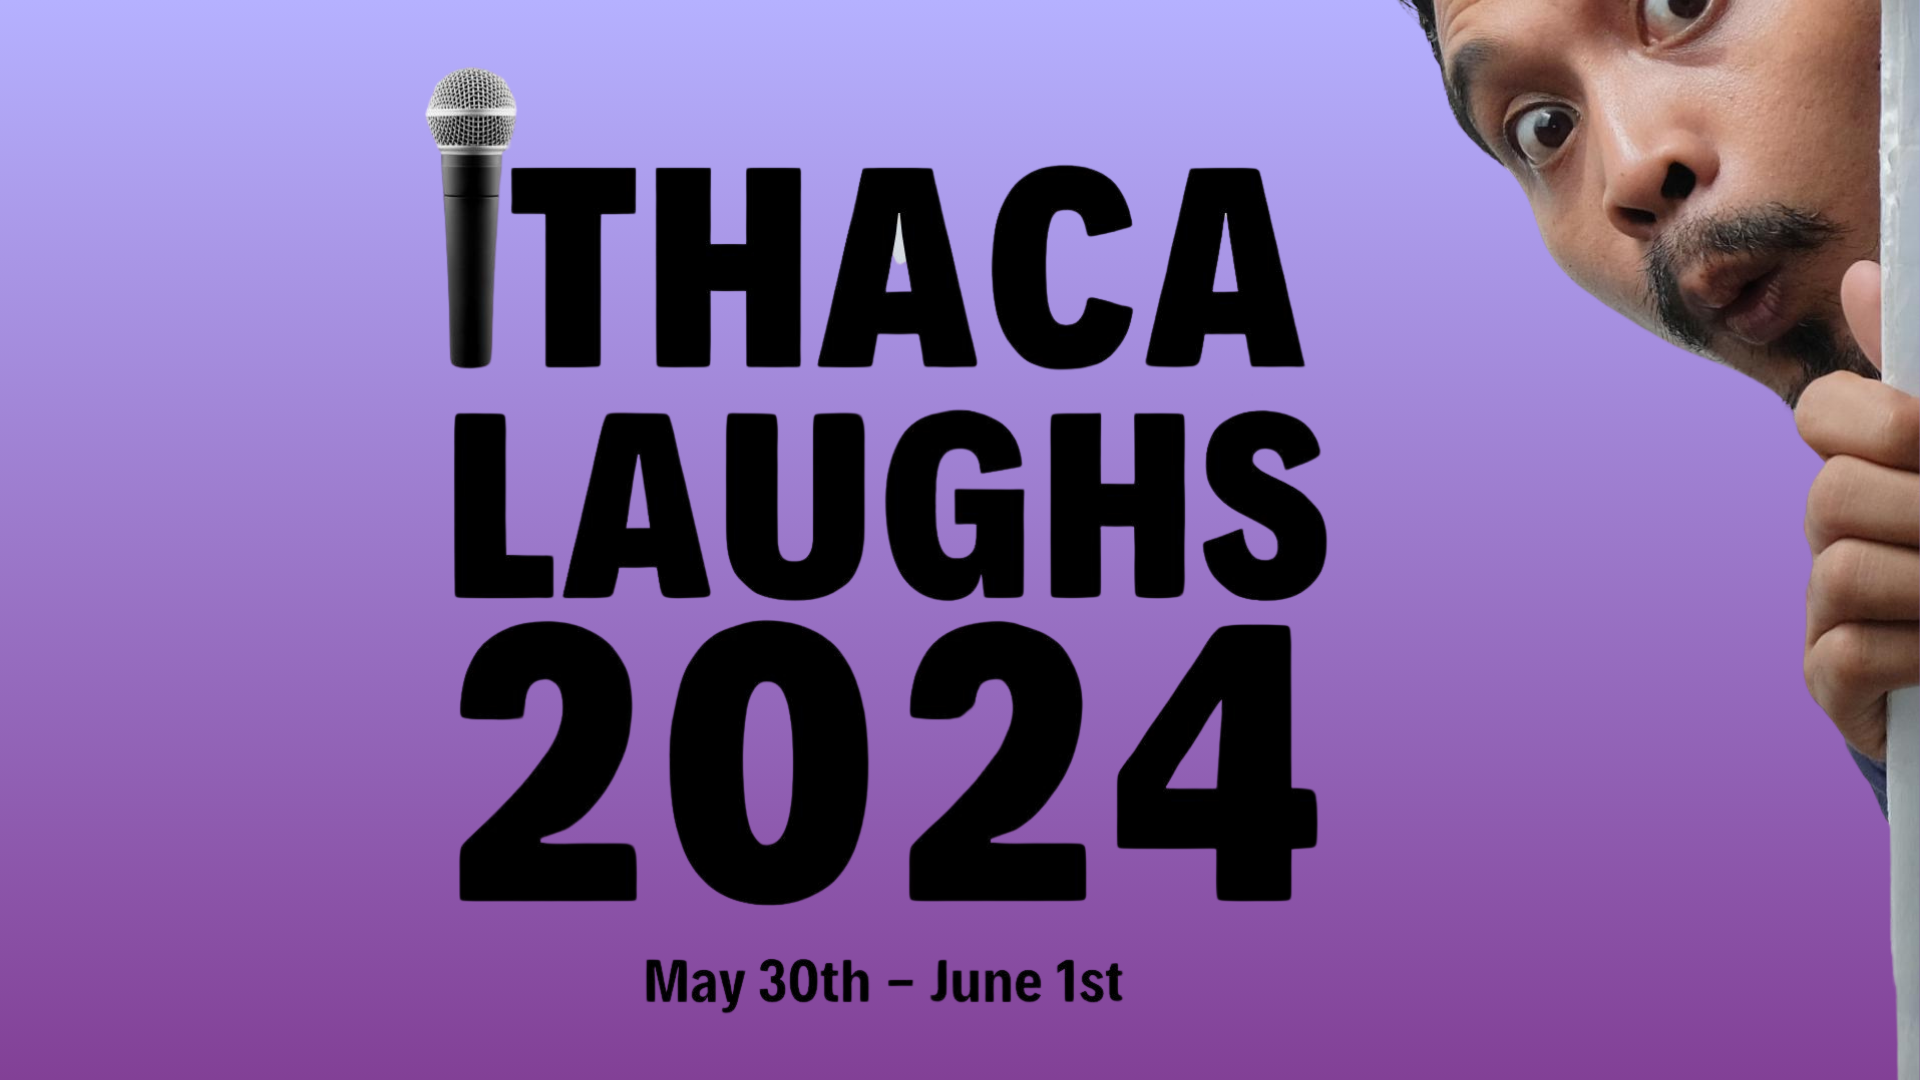 Ithaca is Funny: Ithaca's Comedy Showcase